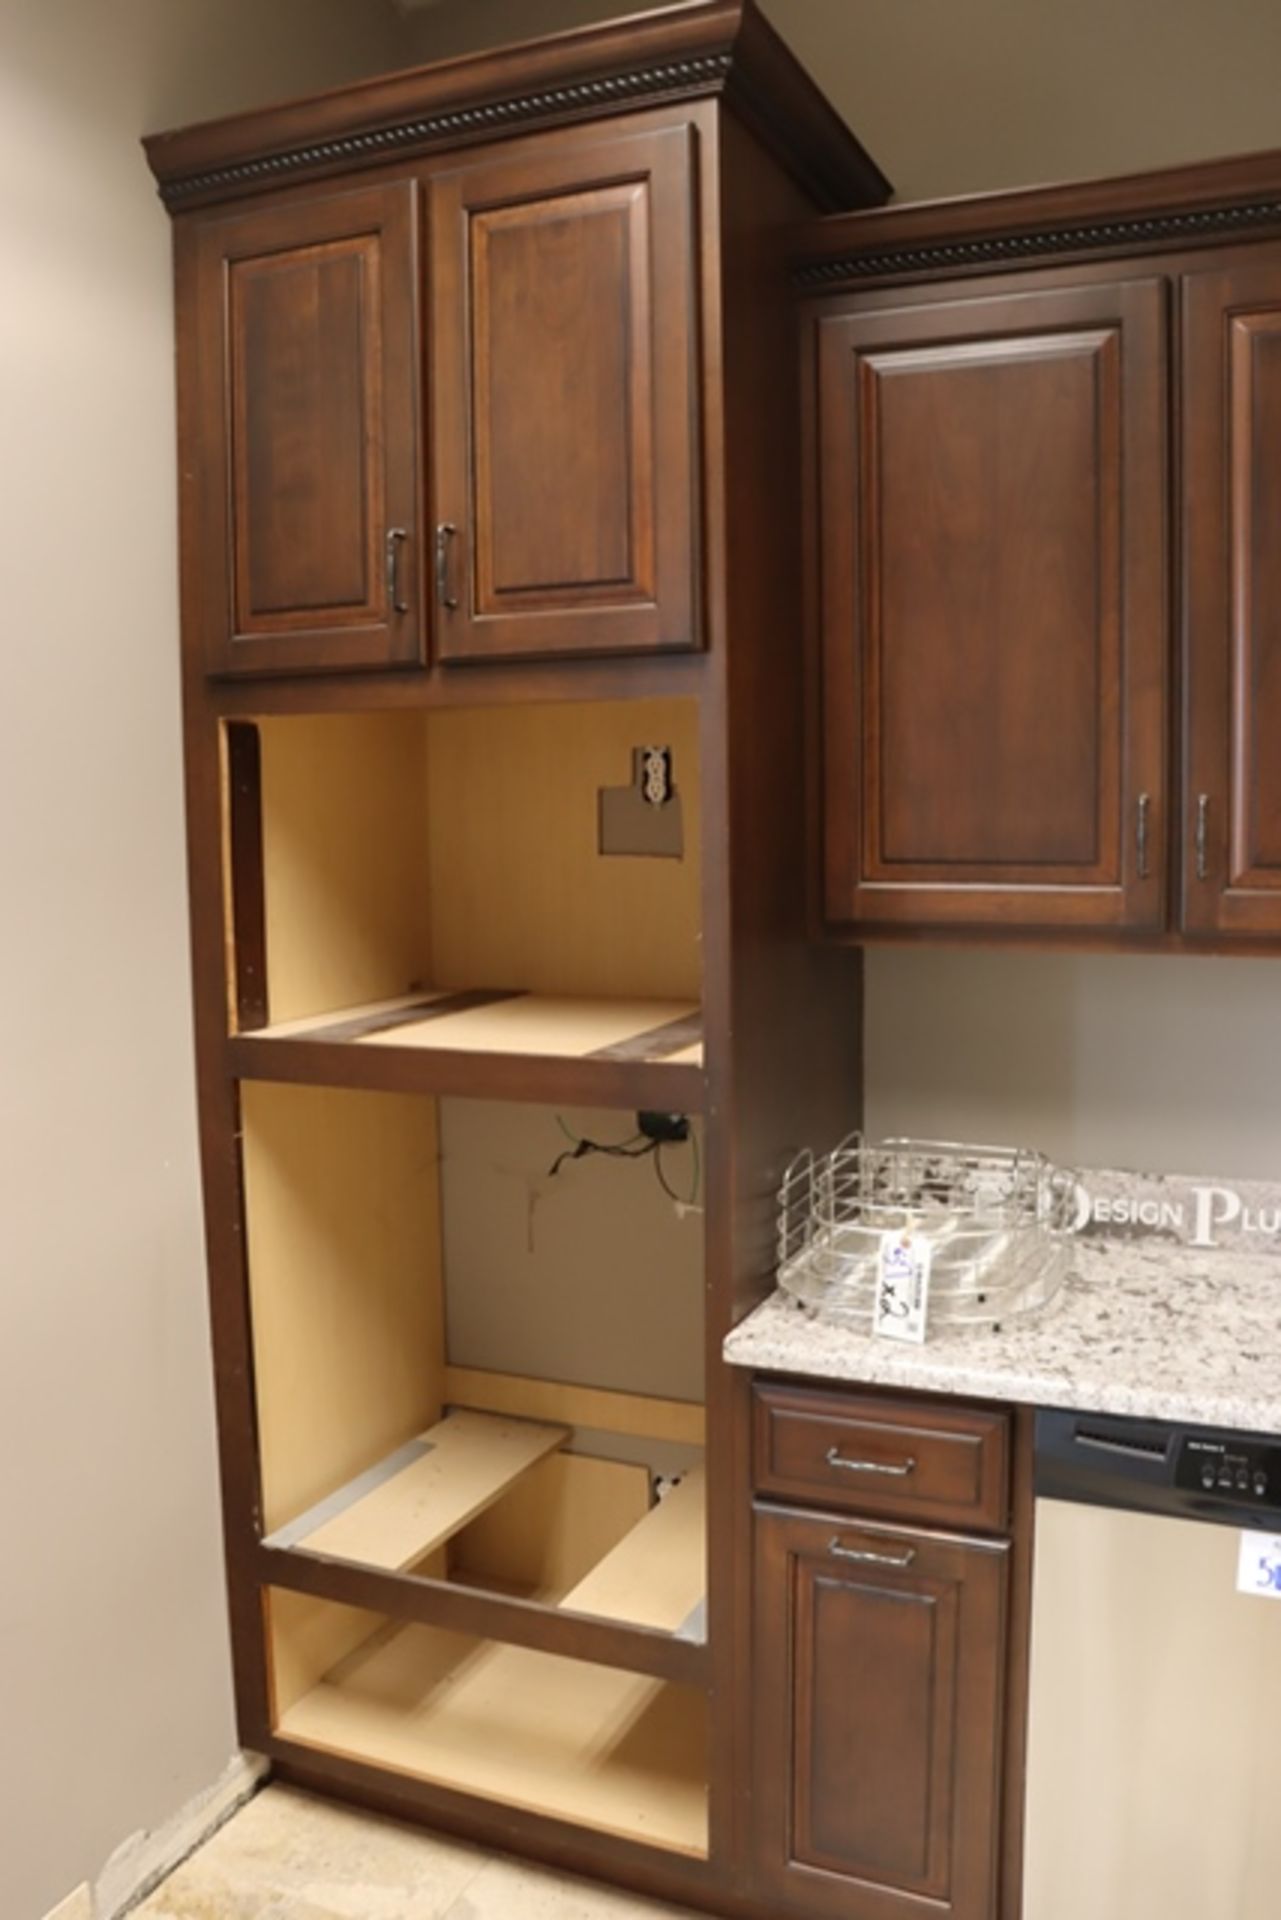 18' x 99" tall kitchen cabinet display - very nice - (dishwasher & refriger - Image 3 of 4